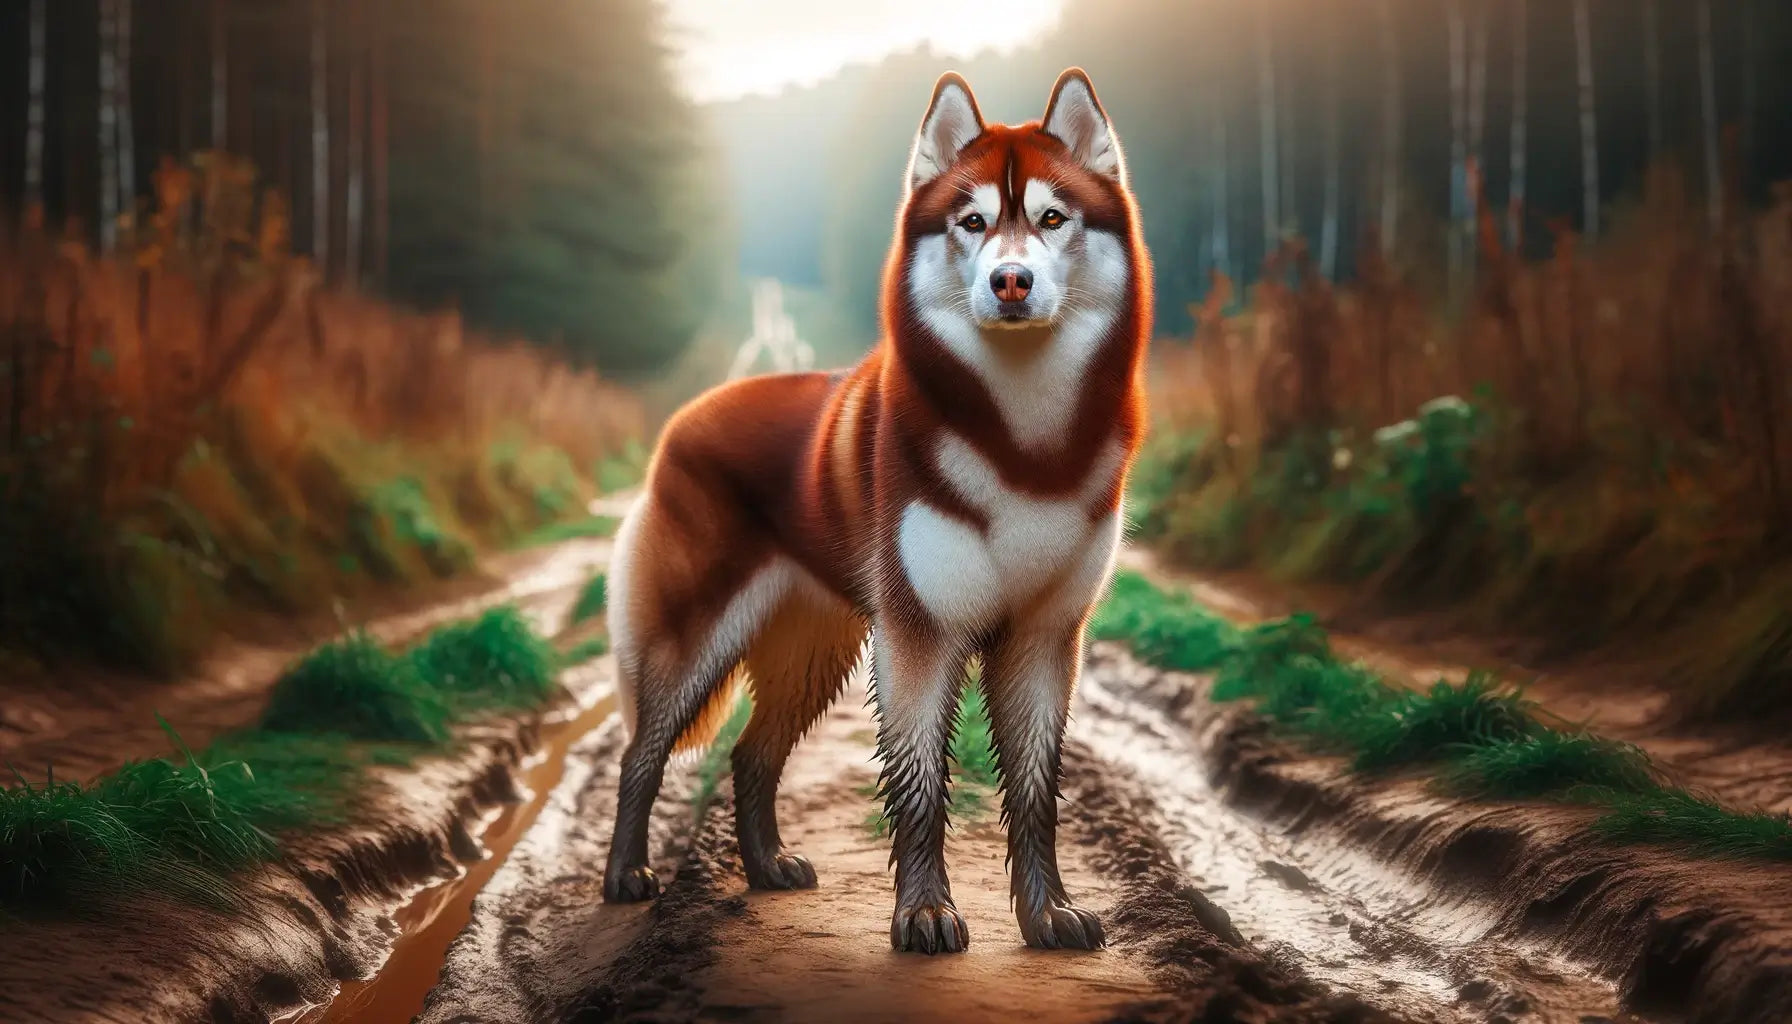 Image showing a confident Red Husky standing on a muddy path in a natural earthy setting.